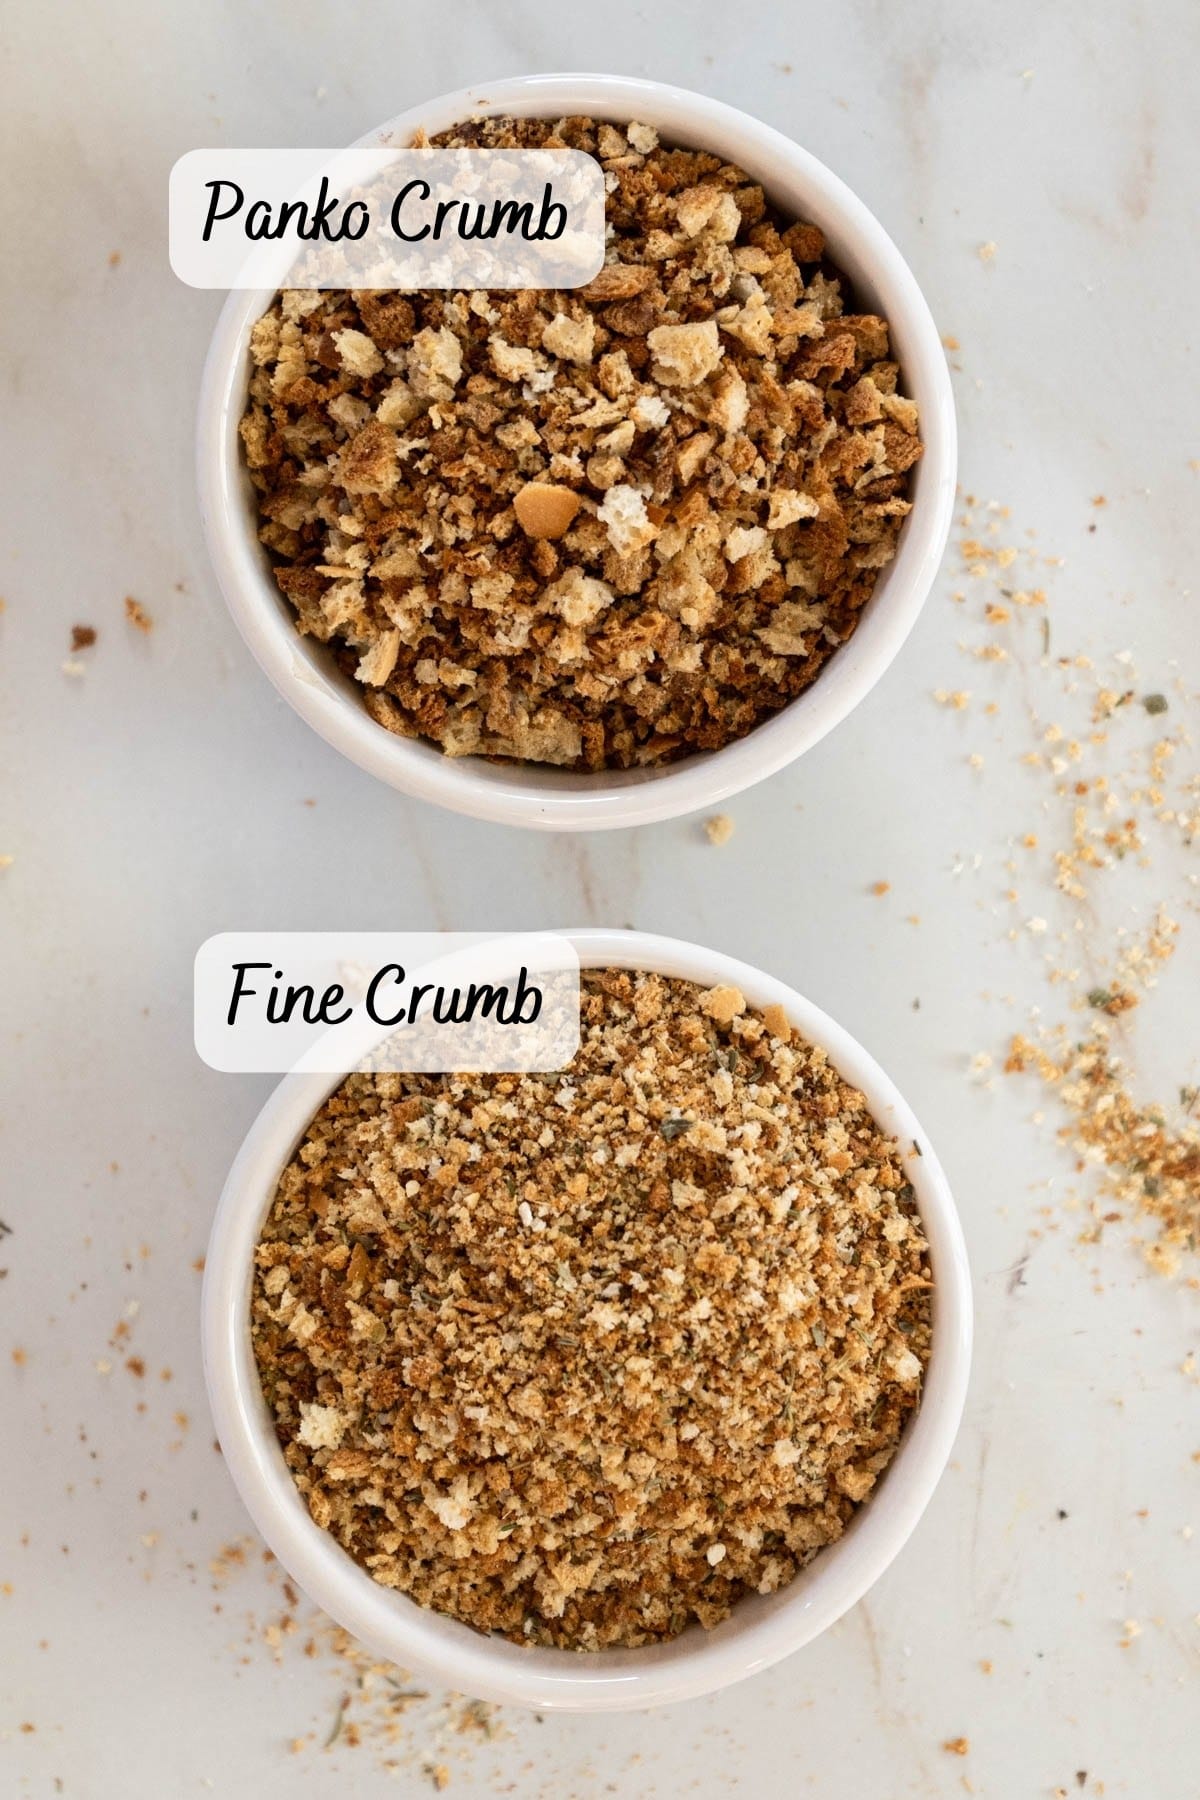 Two bowls of gluten free bread crumbs, one a coarse texture labeled panko and one fine textured,.